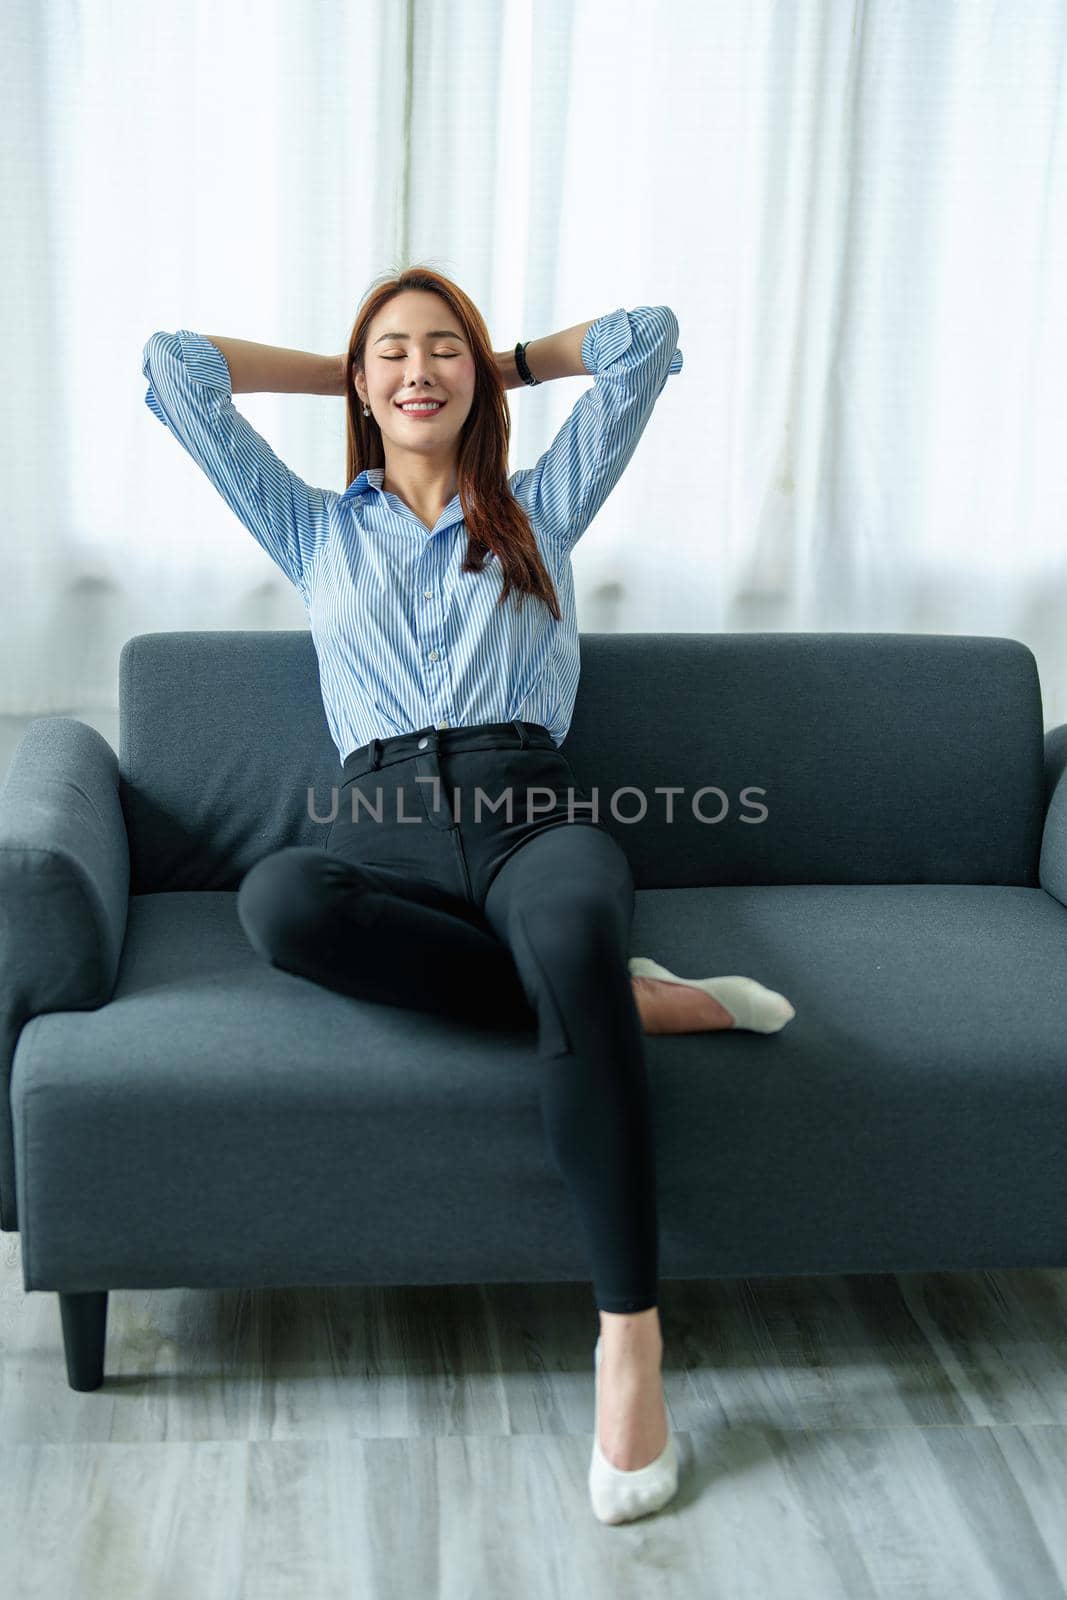 personal business, business owner, leisure, pleasure from work, portrait of an Asian woman smiling happily at home by Manastrong